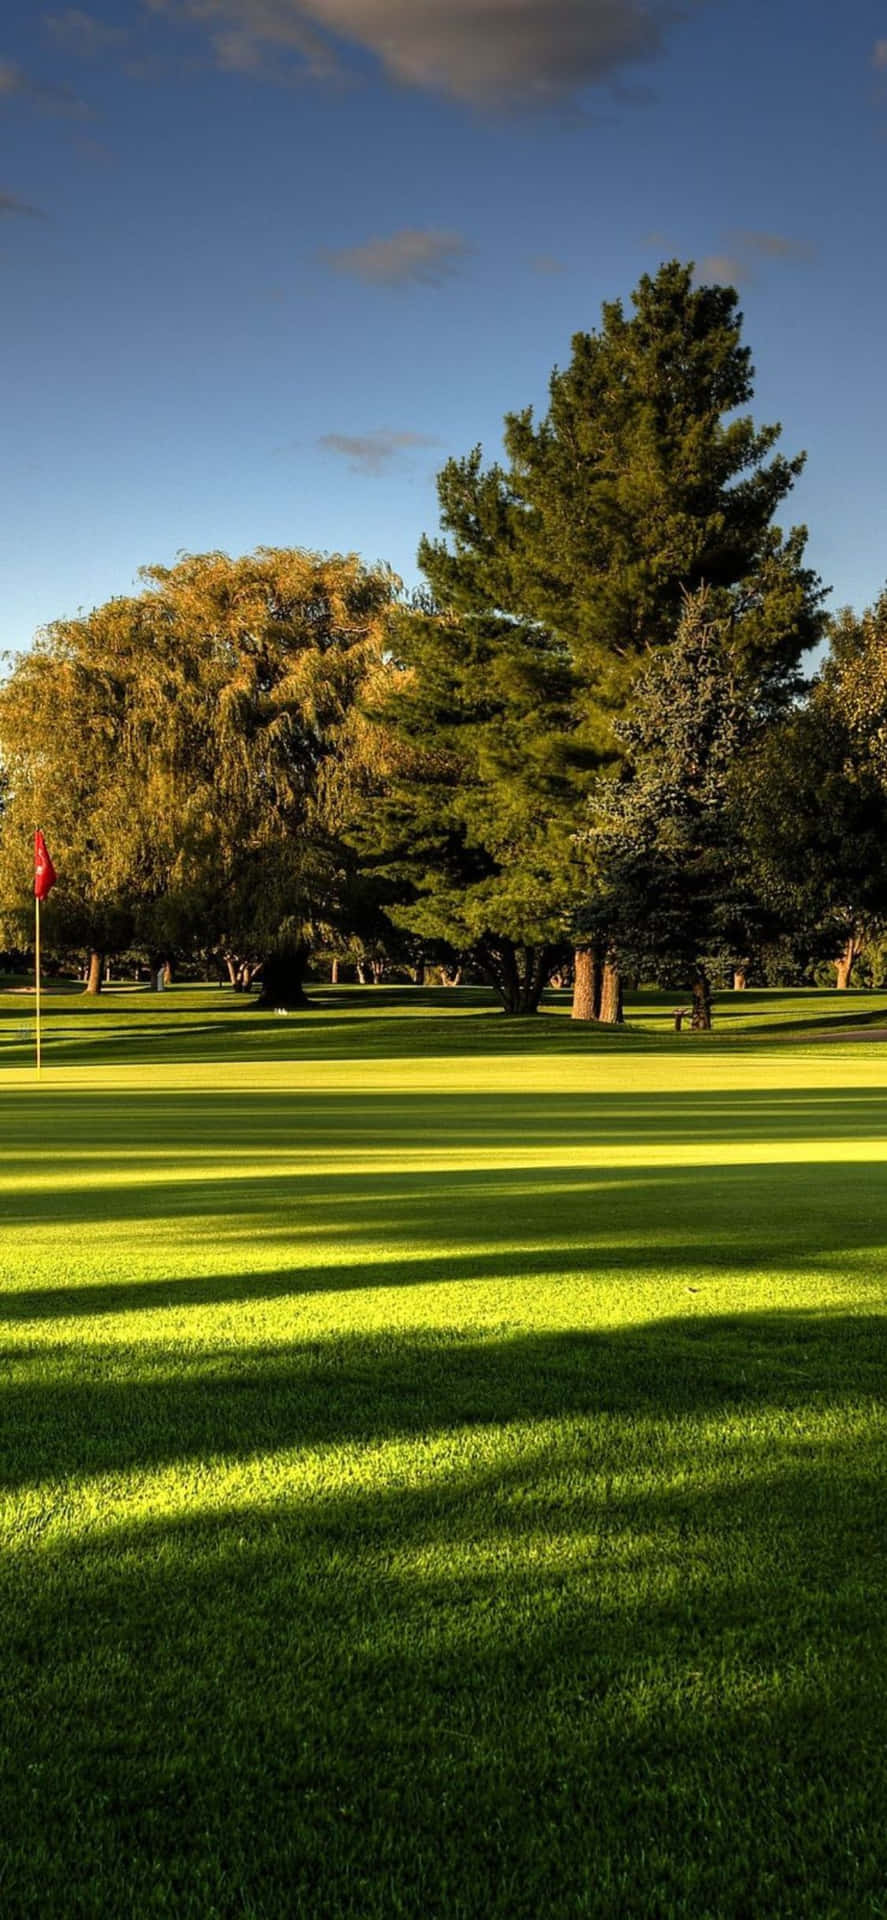 Enjoy a serene day of golf on this beautiful forested golf course